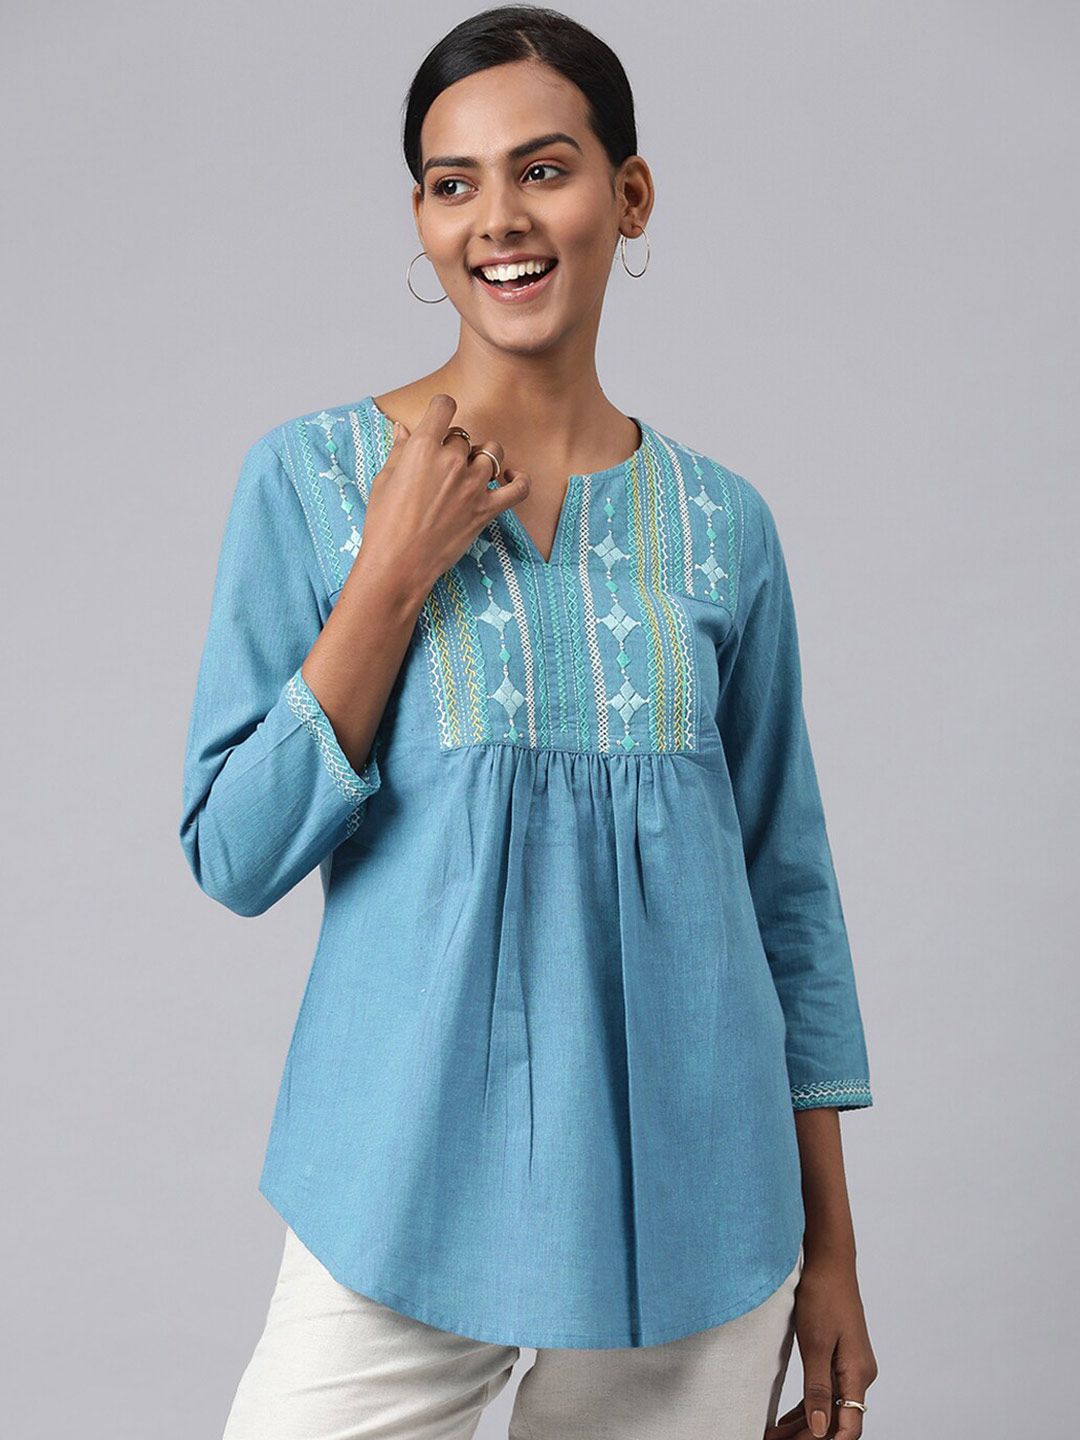 Fabindia Women Blue Embroidered A-Line Cotton Top Price in India